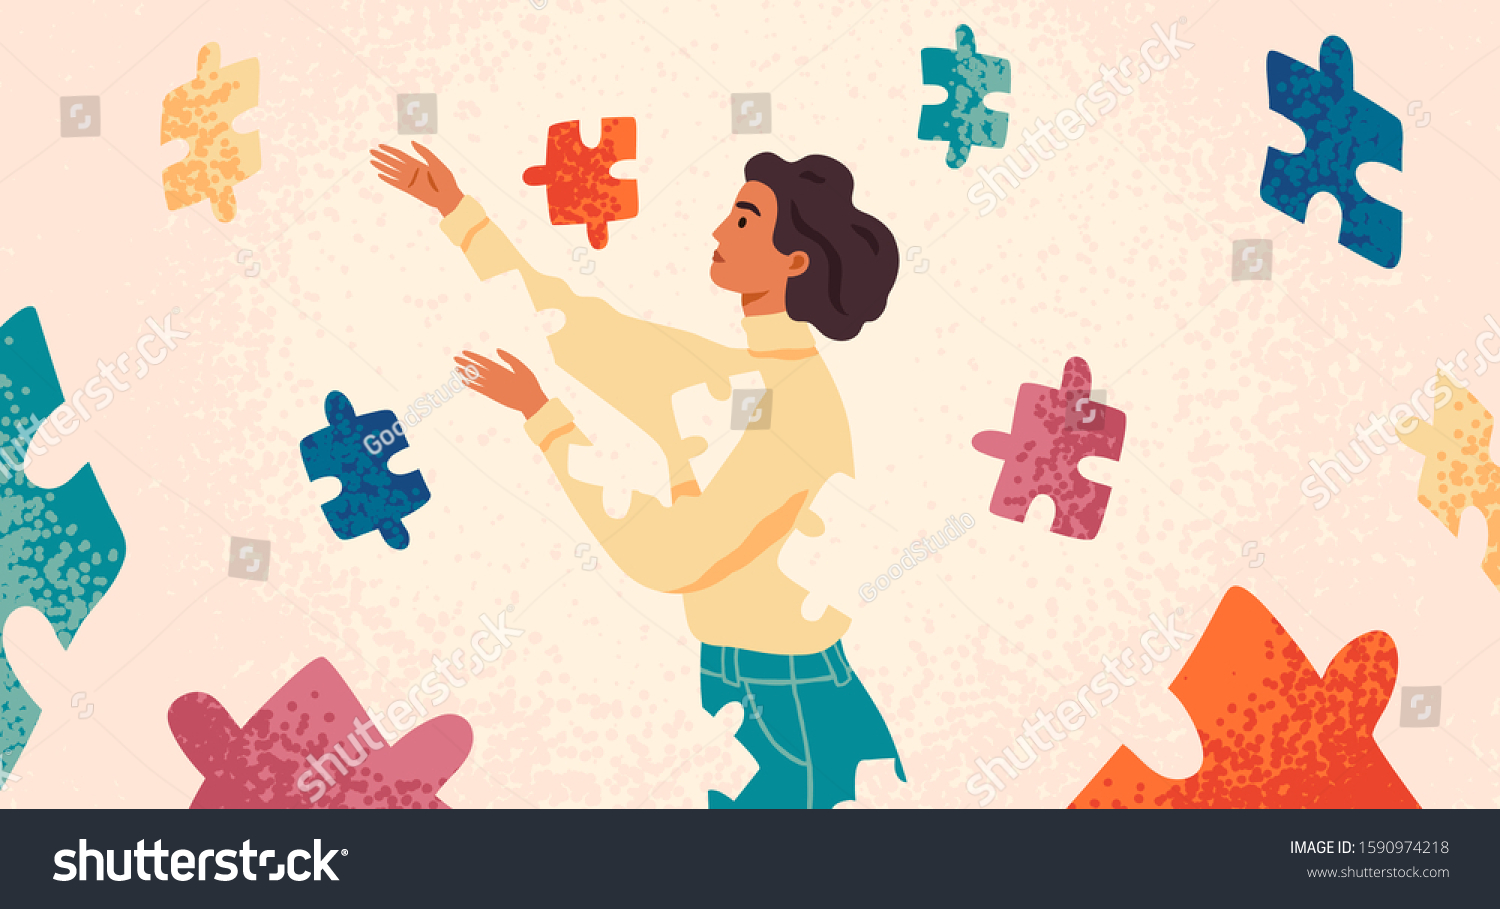 Self healing, recovery flat vector illustration. Woman assembling herself cartoon character. Girl feeling incomplete, looking for fitting puzzle pieces. Mental rehabilitation, psychotherapy concept. #1590974218